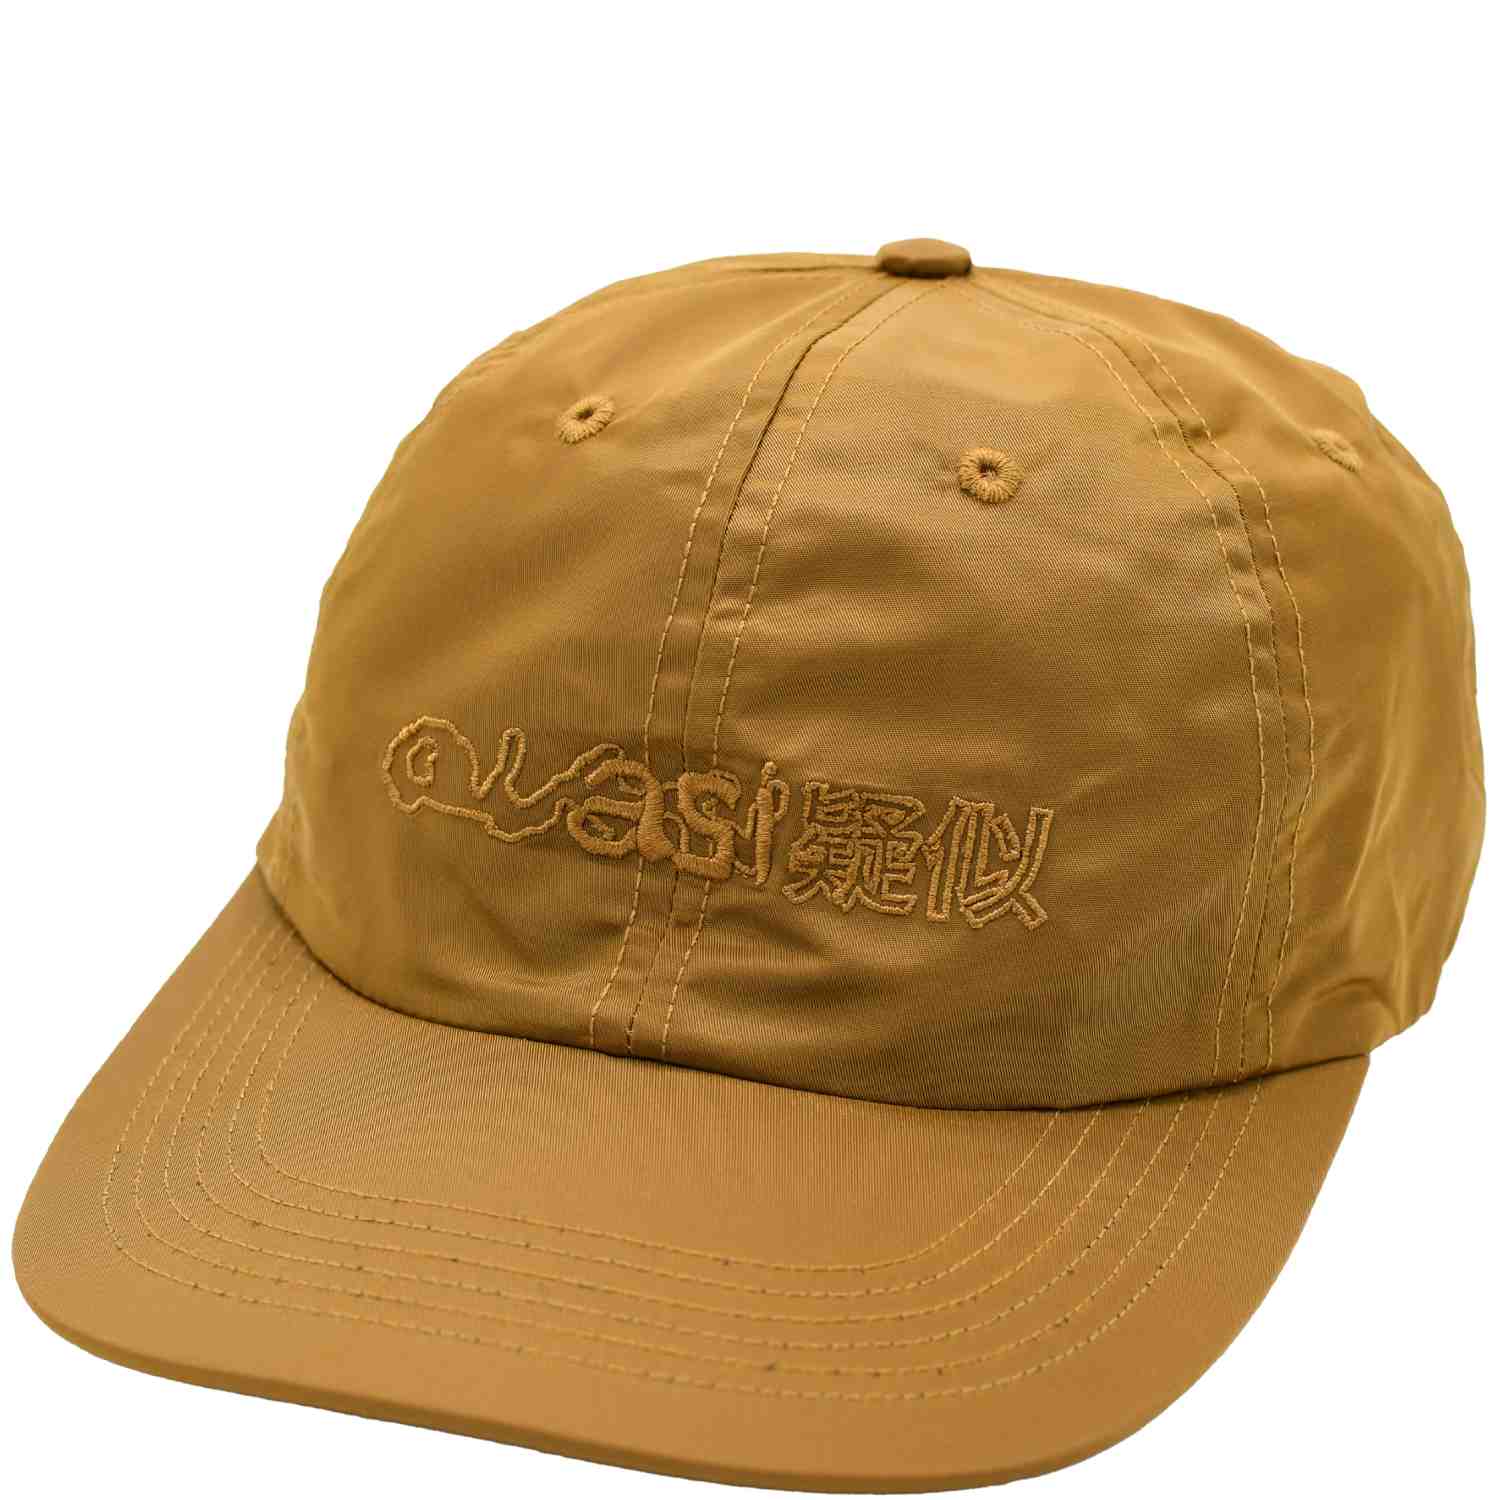 Quasi - Slang 6 Panel Hat in tan colorway with embroidered quasi logo on front.